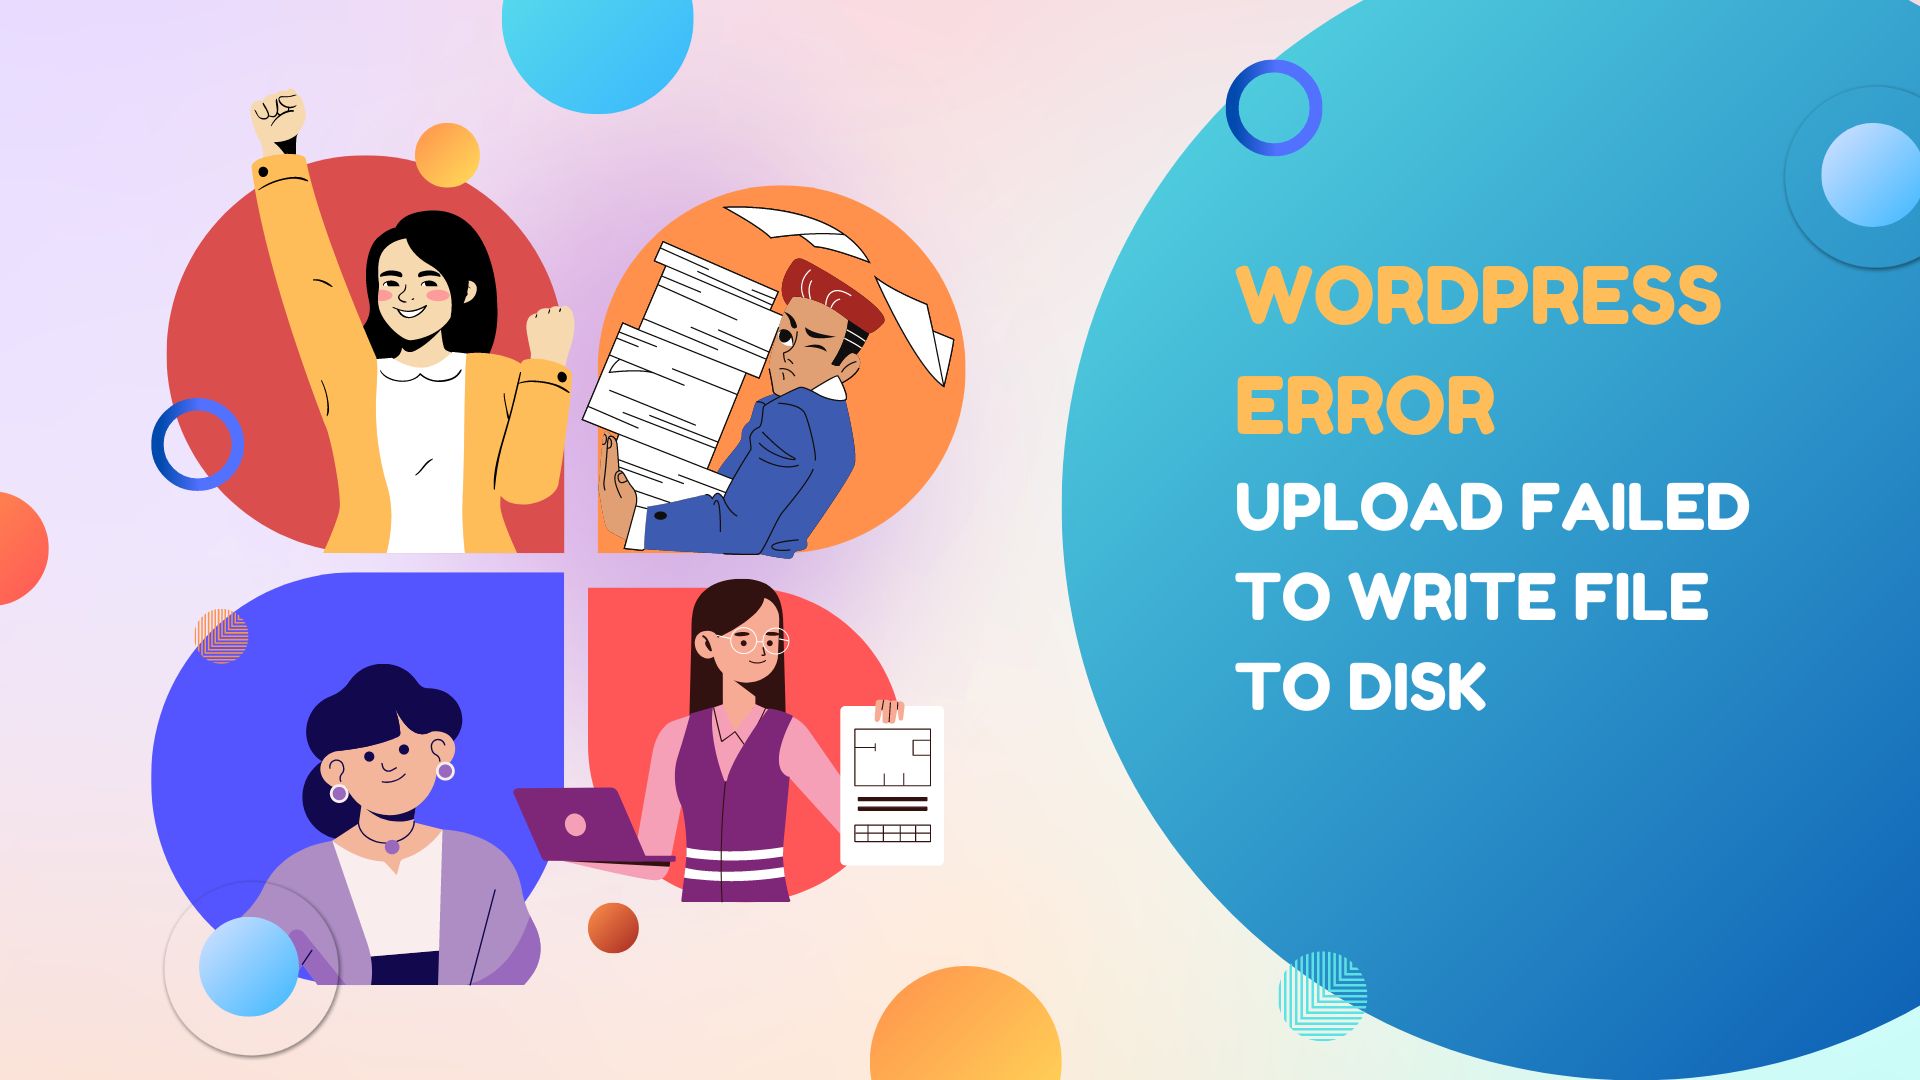 Upload failed to write file to disk